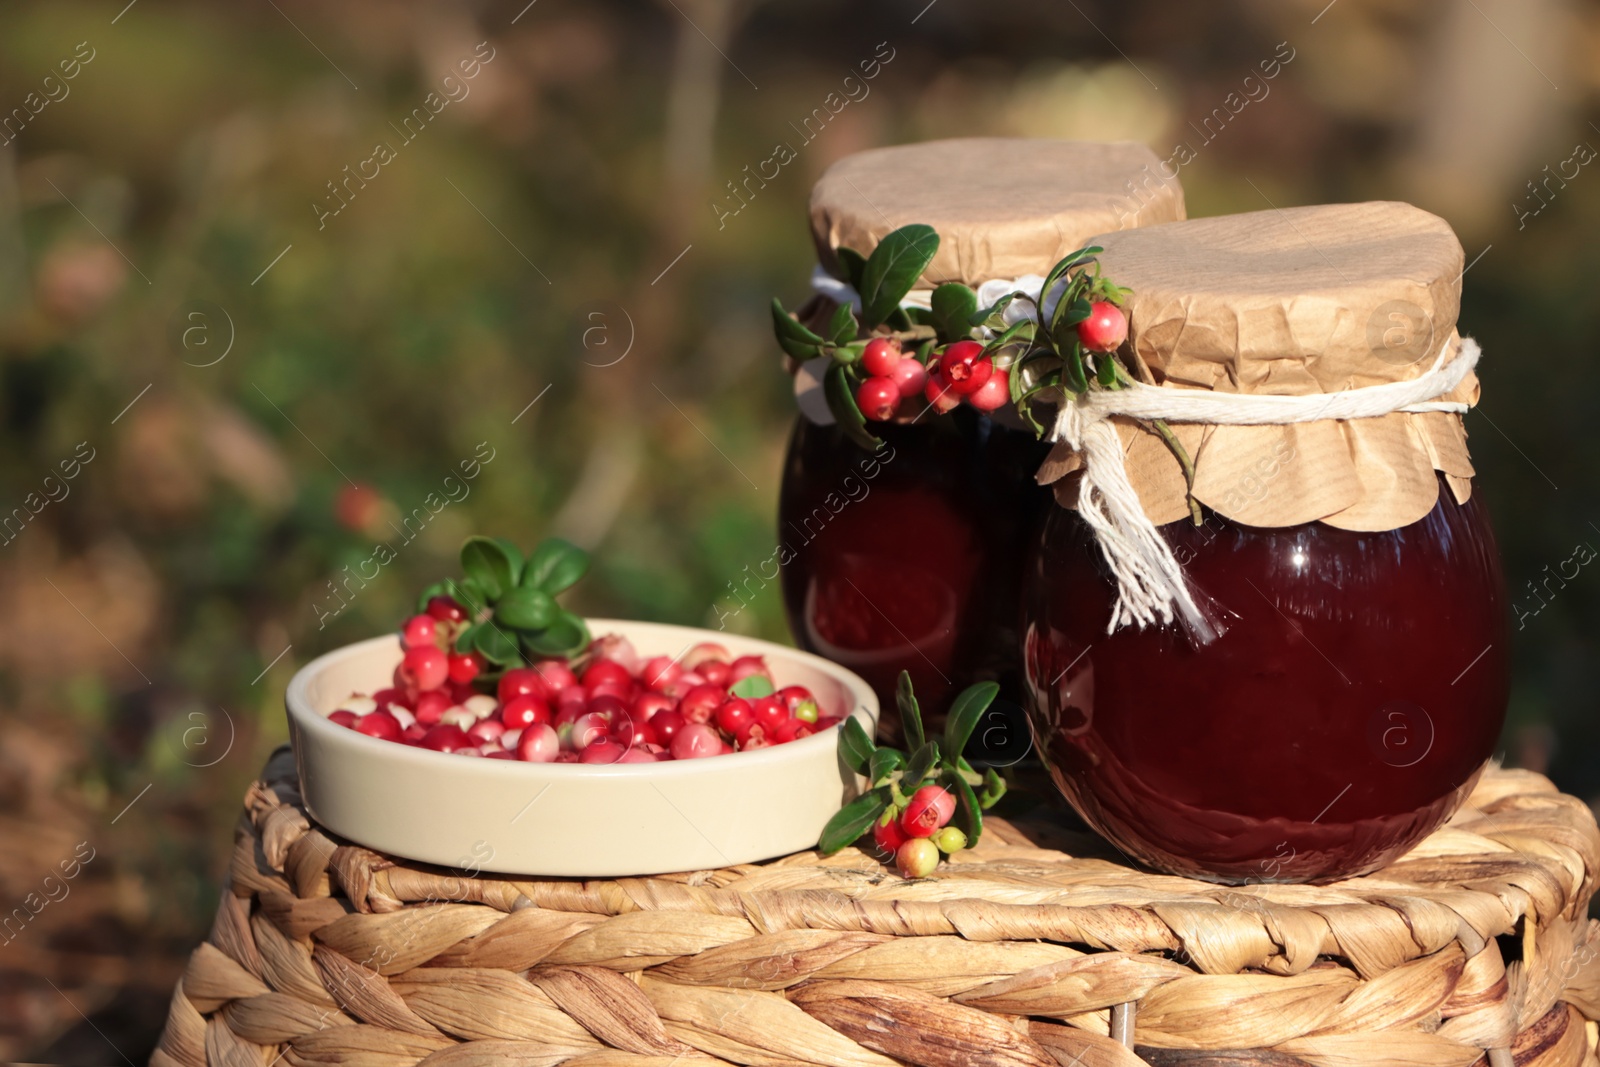 Photo of Jars of delicious lingonberry jam and red berries on wicker basket outdoors